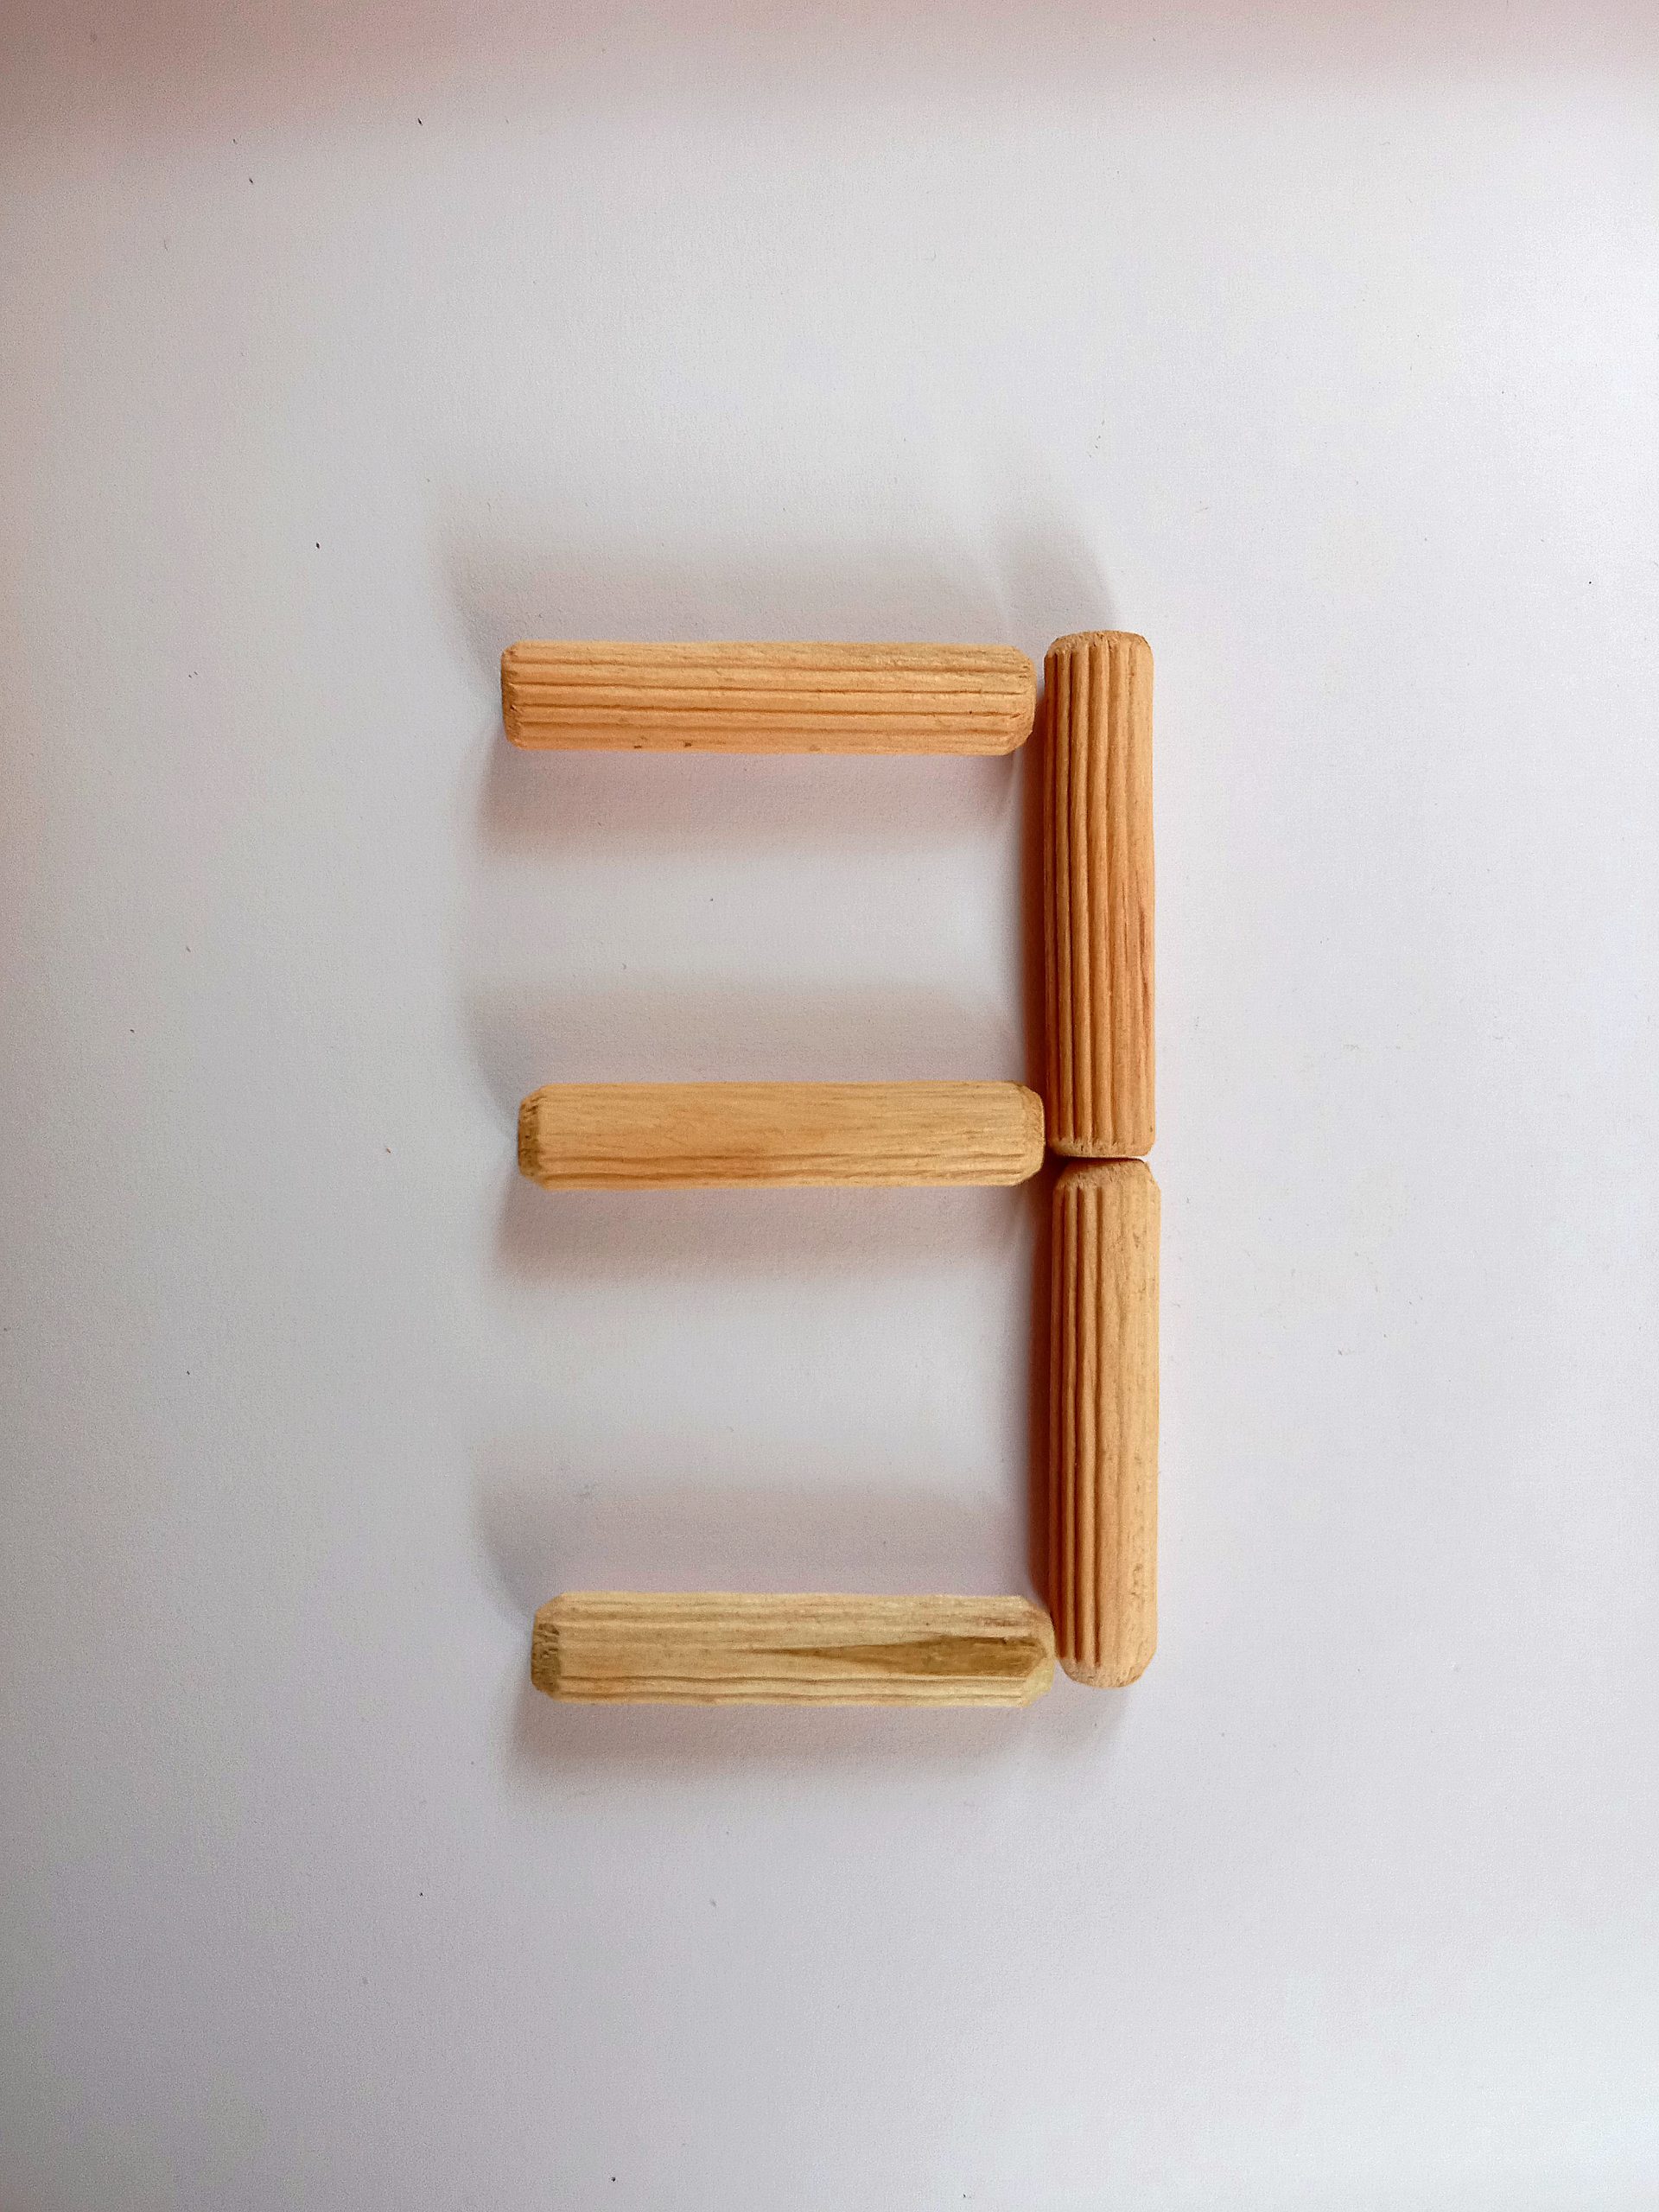 3 made with wooden sticks